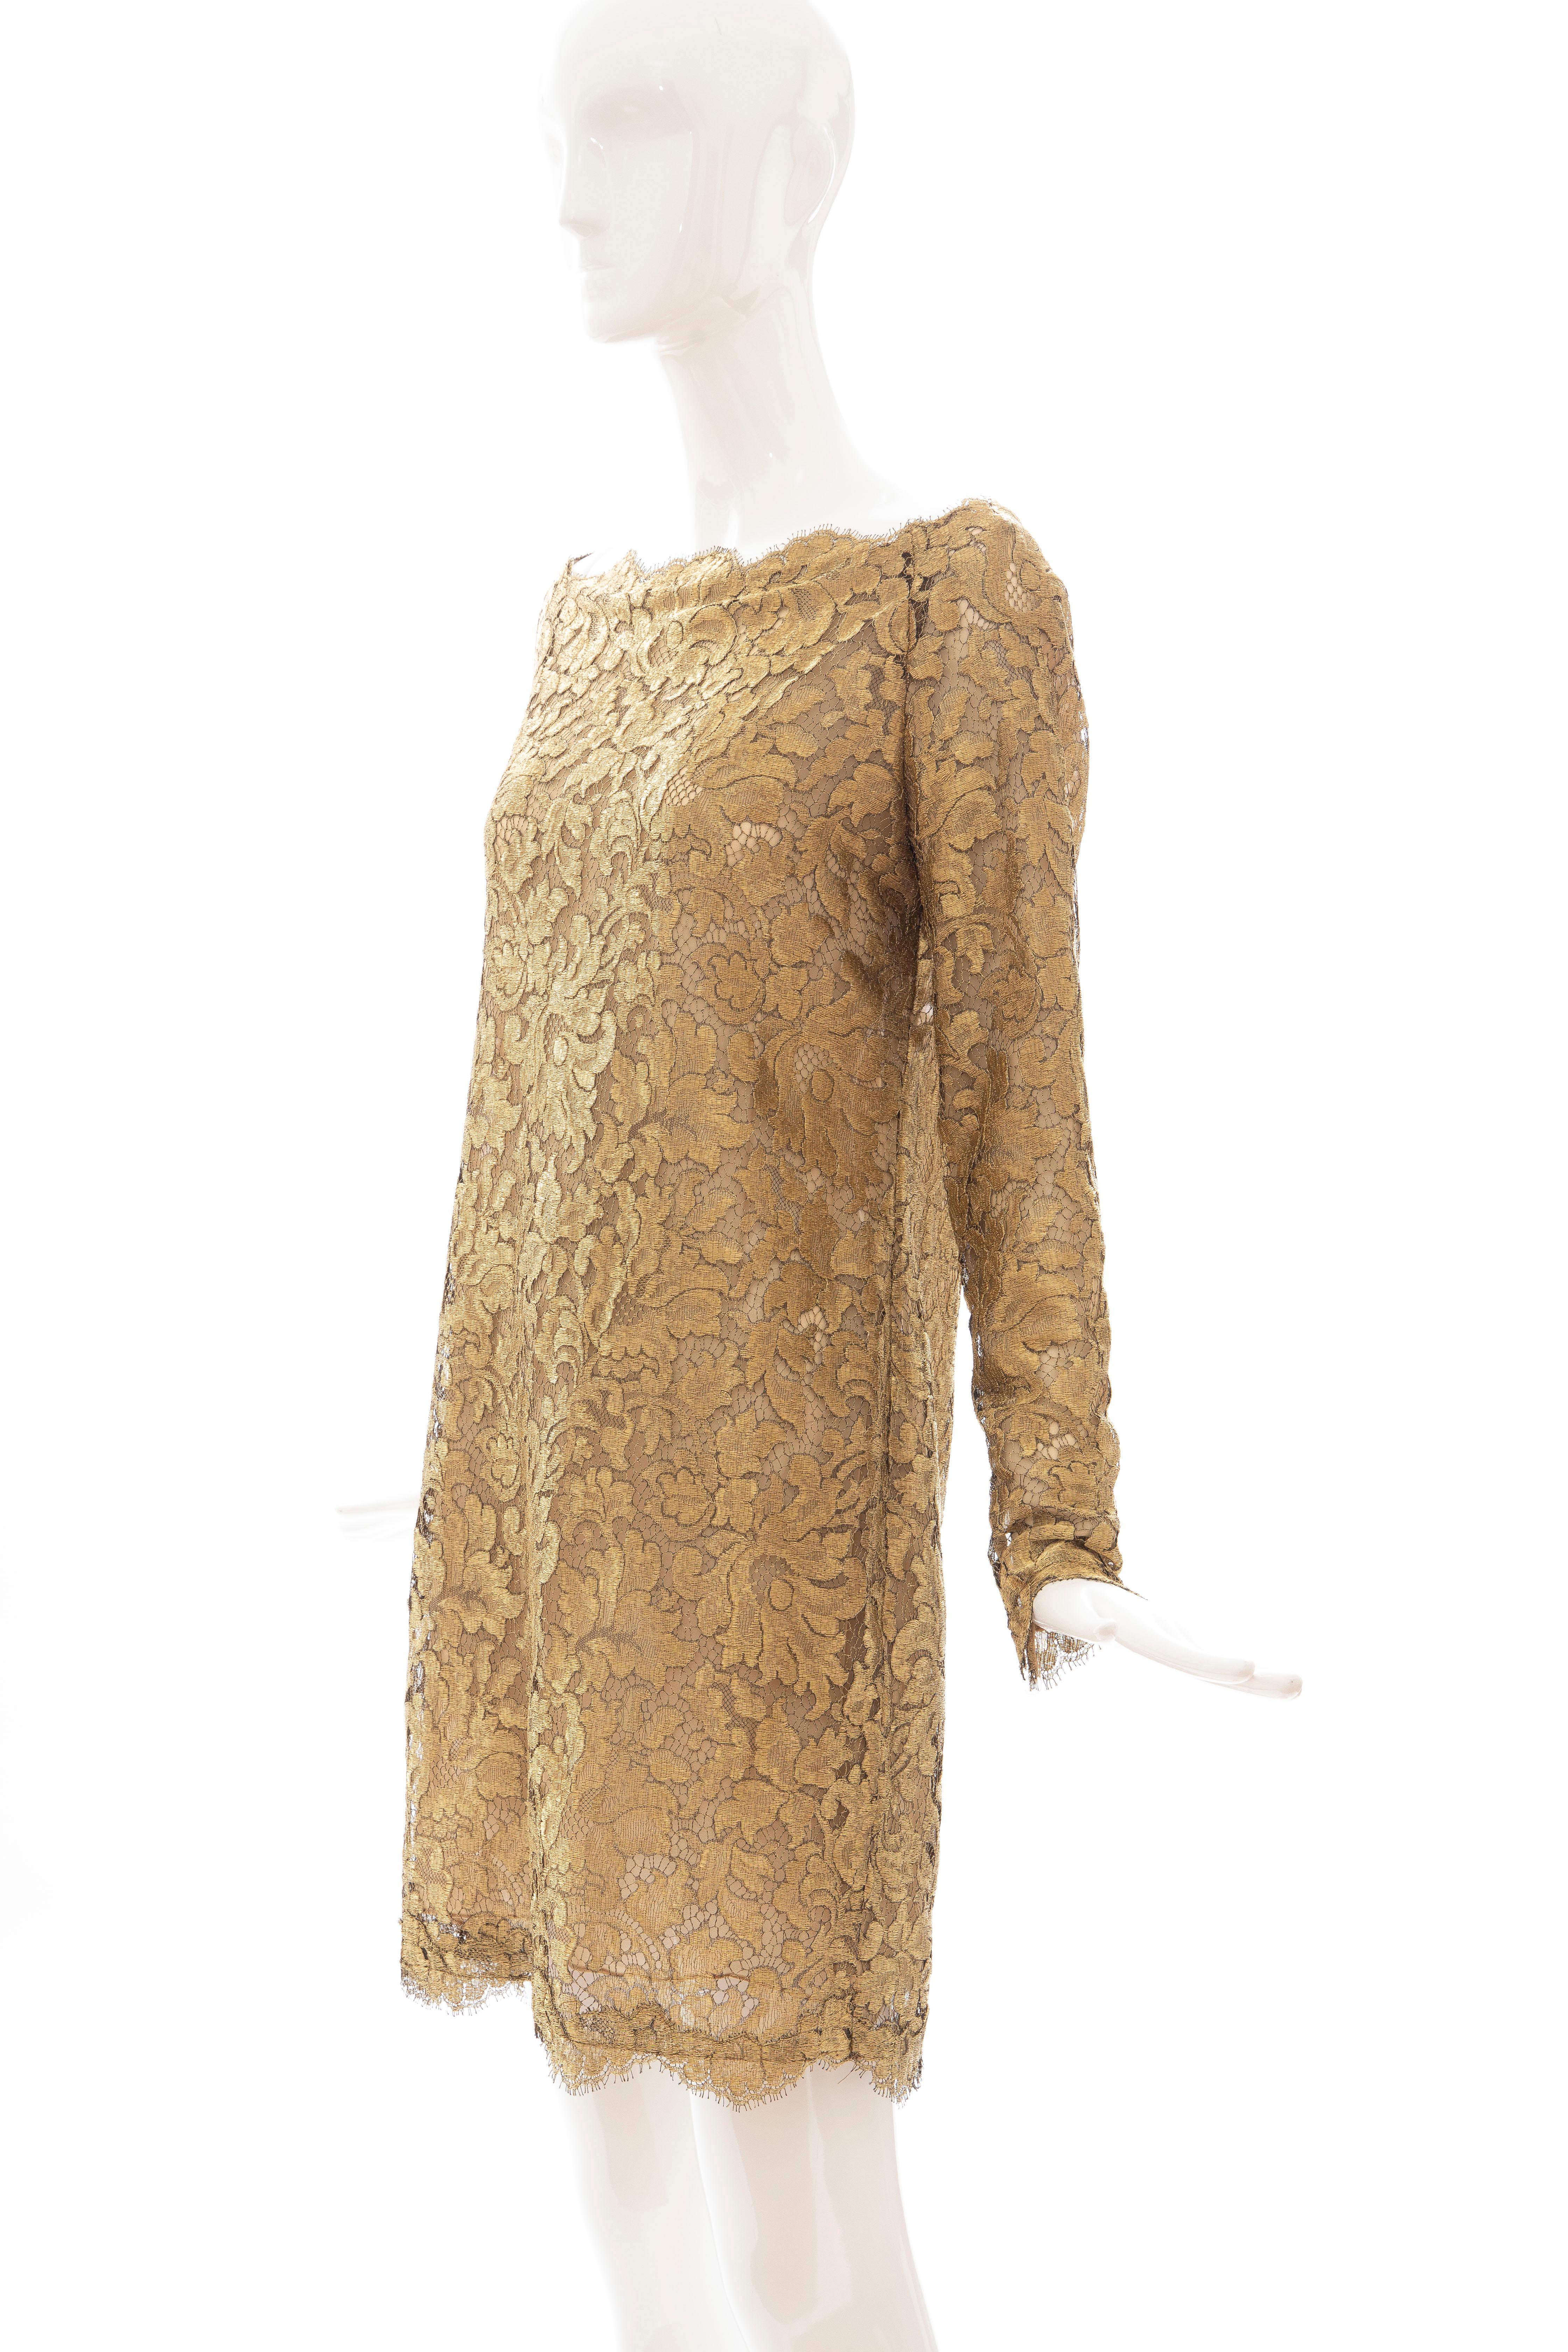 Calvin Klein Collection Metallic Gold Metal Lace Evening Dress, Fall 1991 In Excellent Condition For Sale In Cincinnati, OH